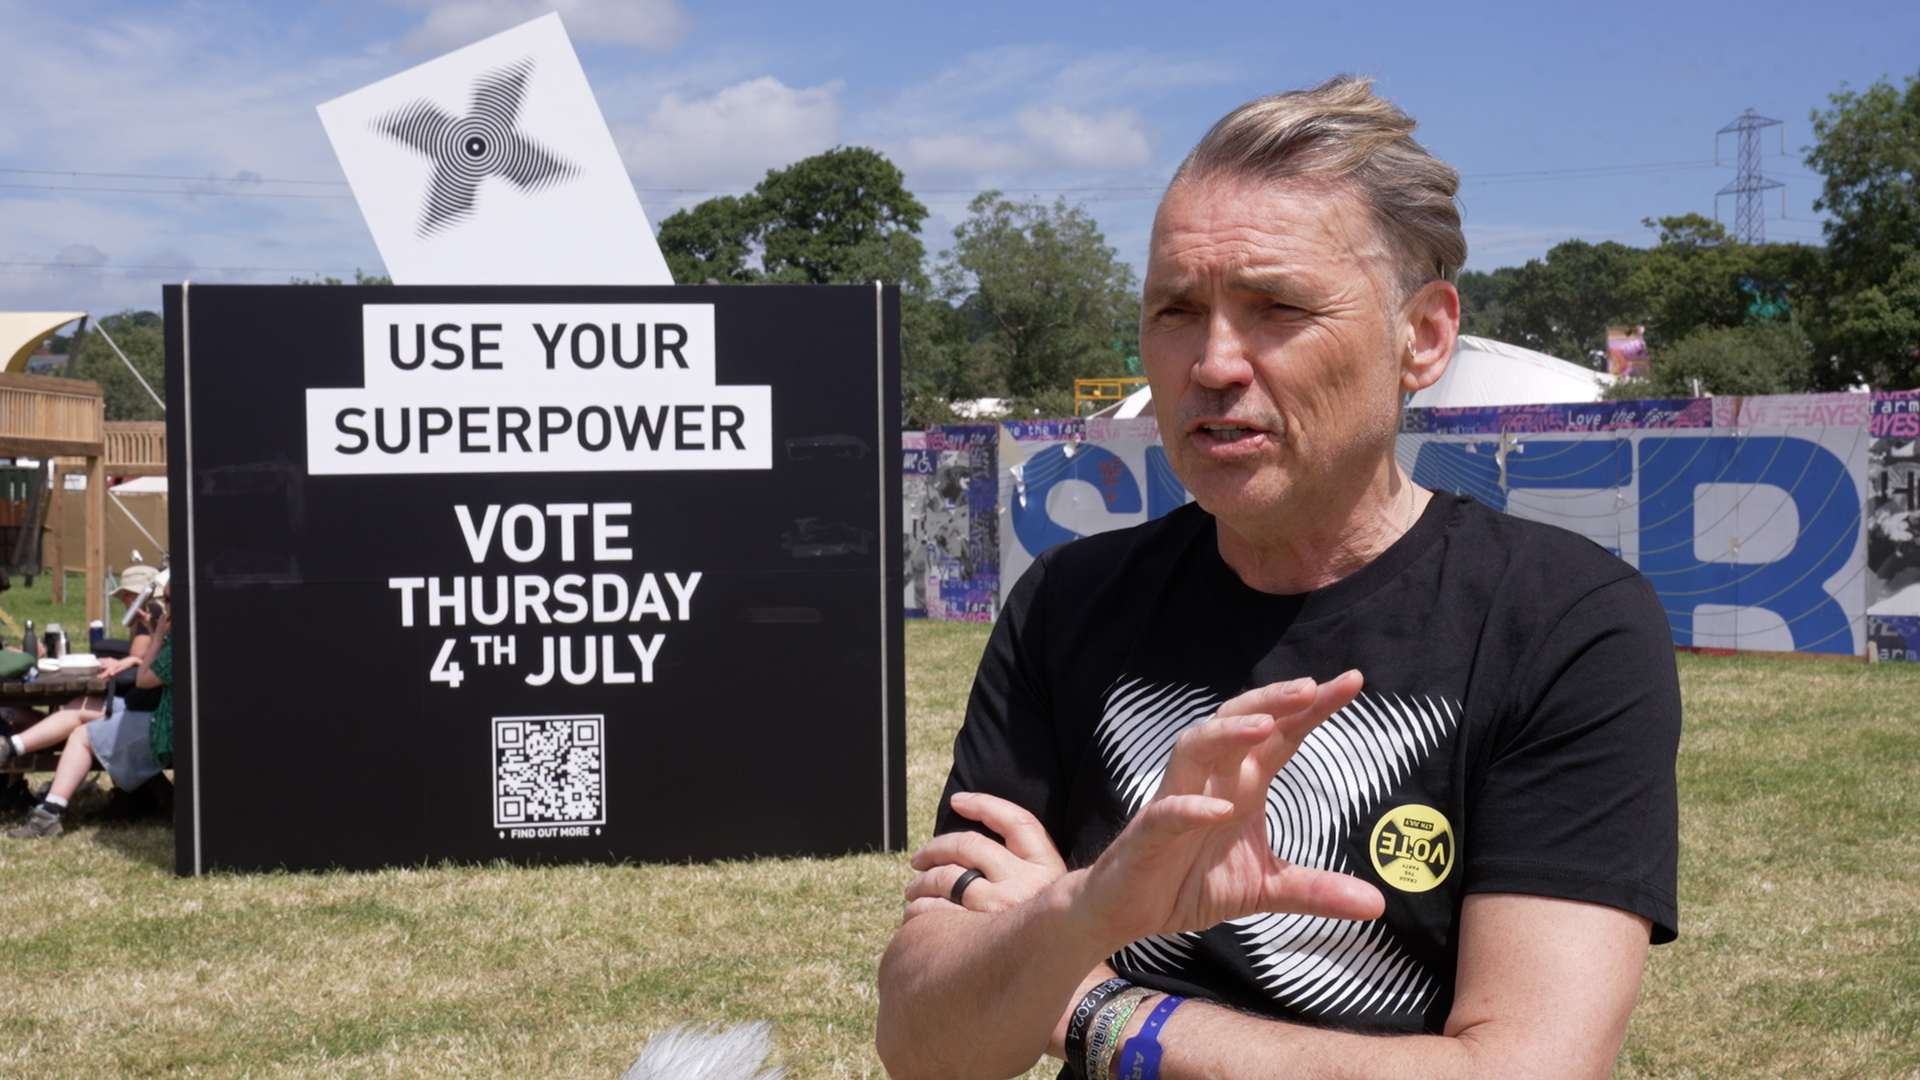 Ecotricity's Dale Vince speaks in front of a black giant ballot box at Glastonbury which features the message 'Use Your Superpower. Vote Thursday 4th July'